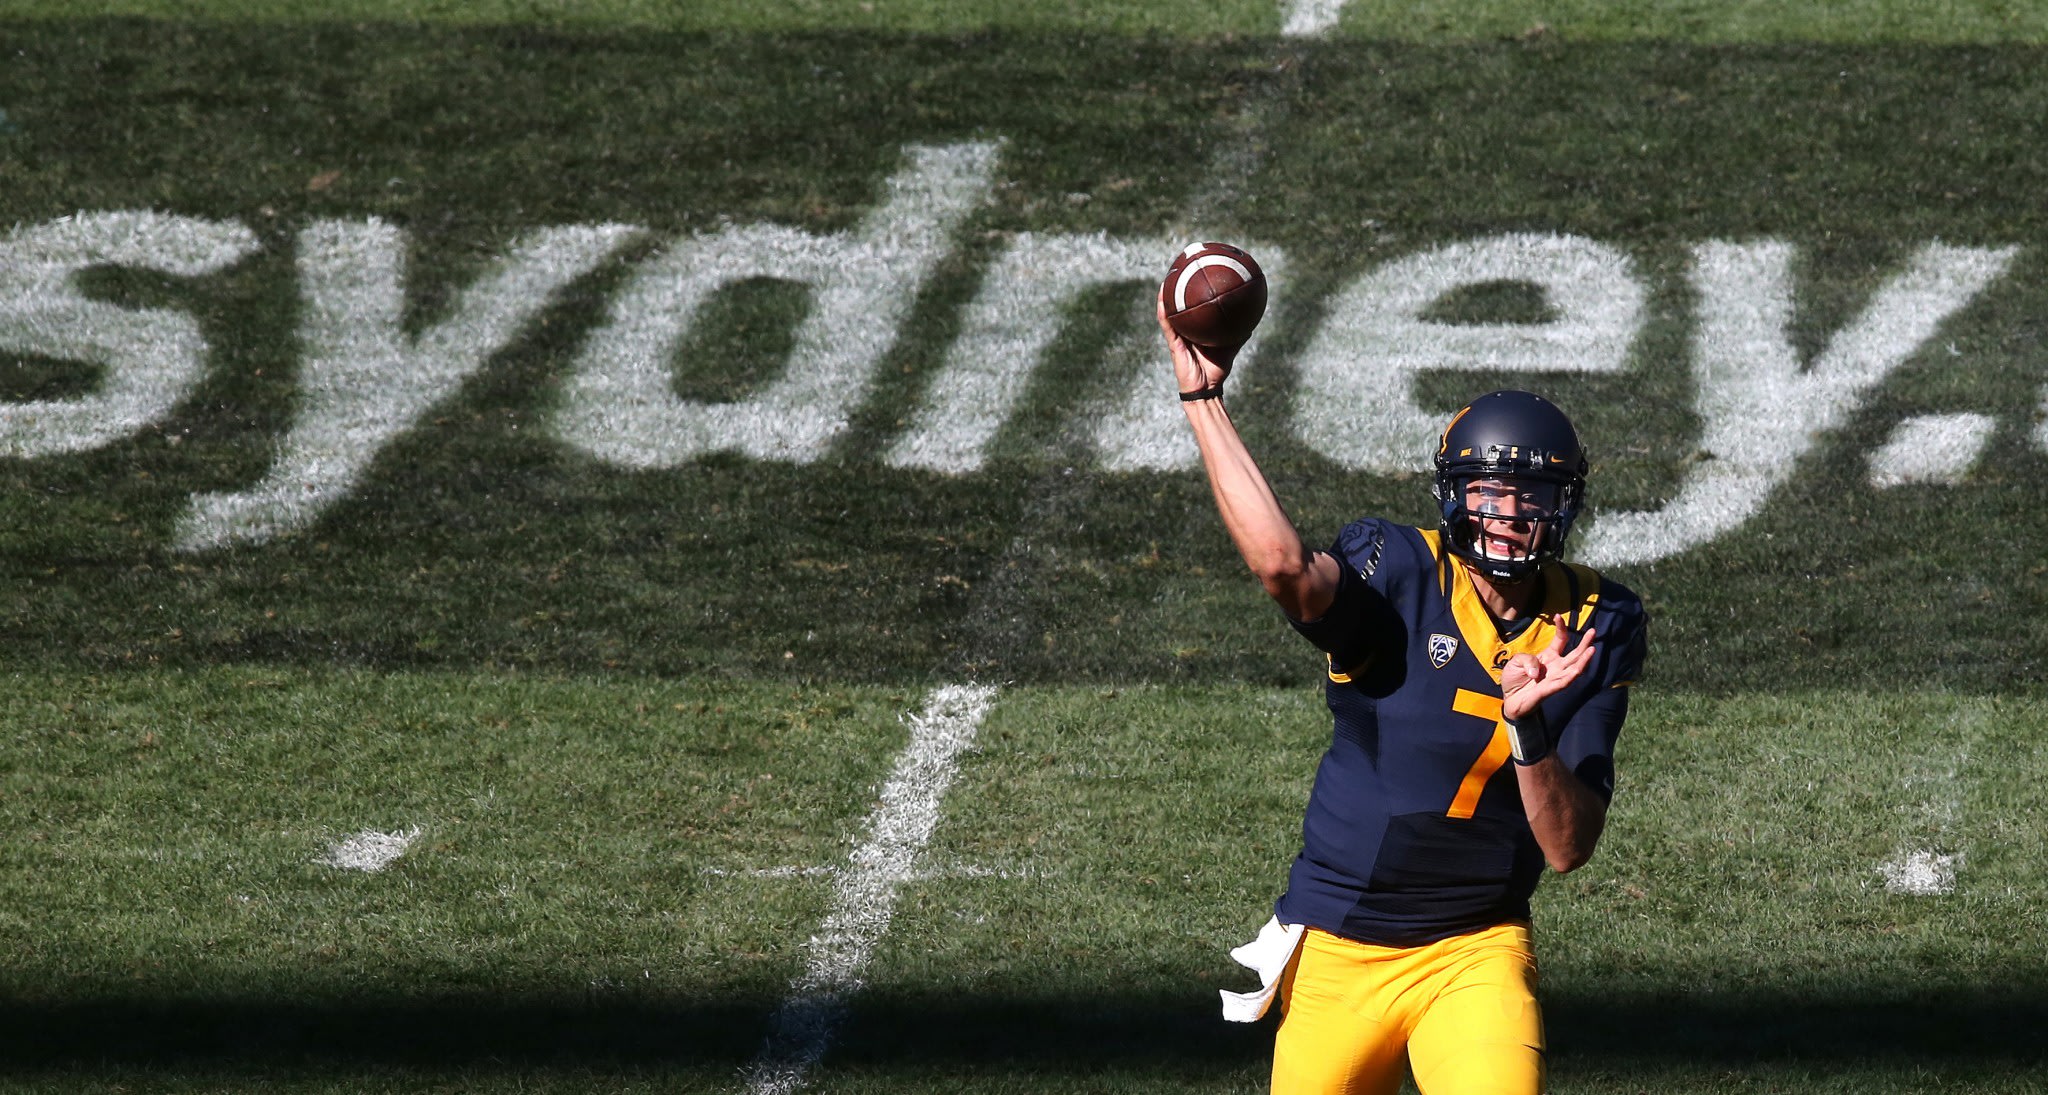 California Golden Bears' quarterback Davis Webb attempts a pass during the opening game of the U.S. college football season against the Hawaii Rainbow...